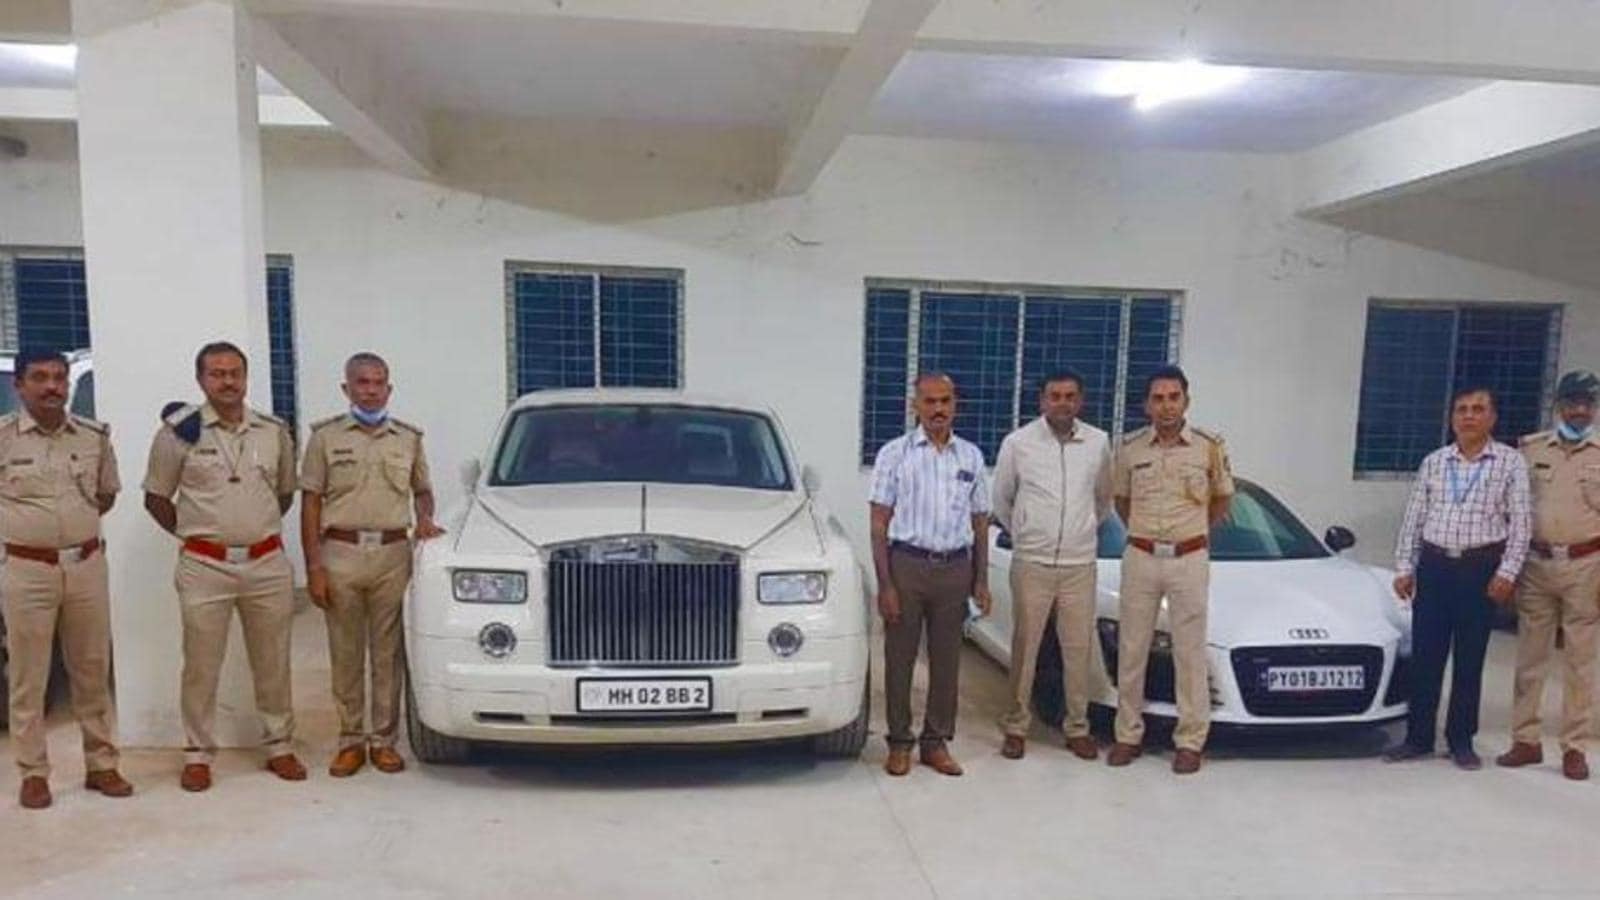 Rolls Royce, once owned by Amitabh Bachchan, among 7 cars seized in Karnataka | Latest News India - Hindustan Times